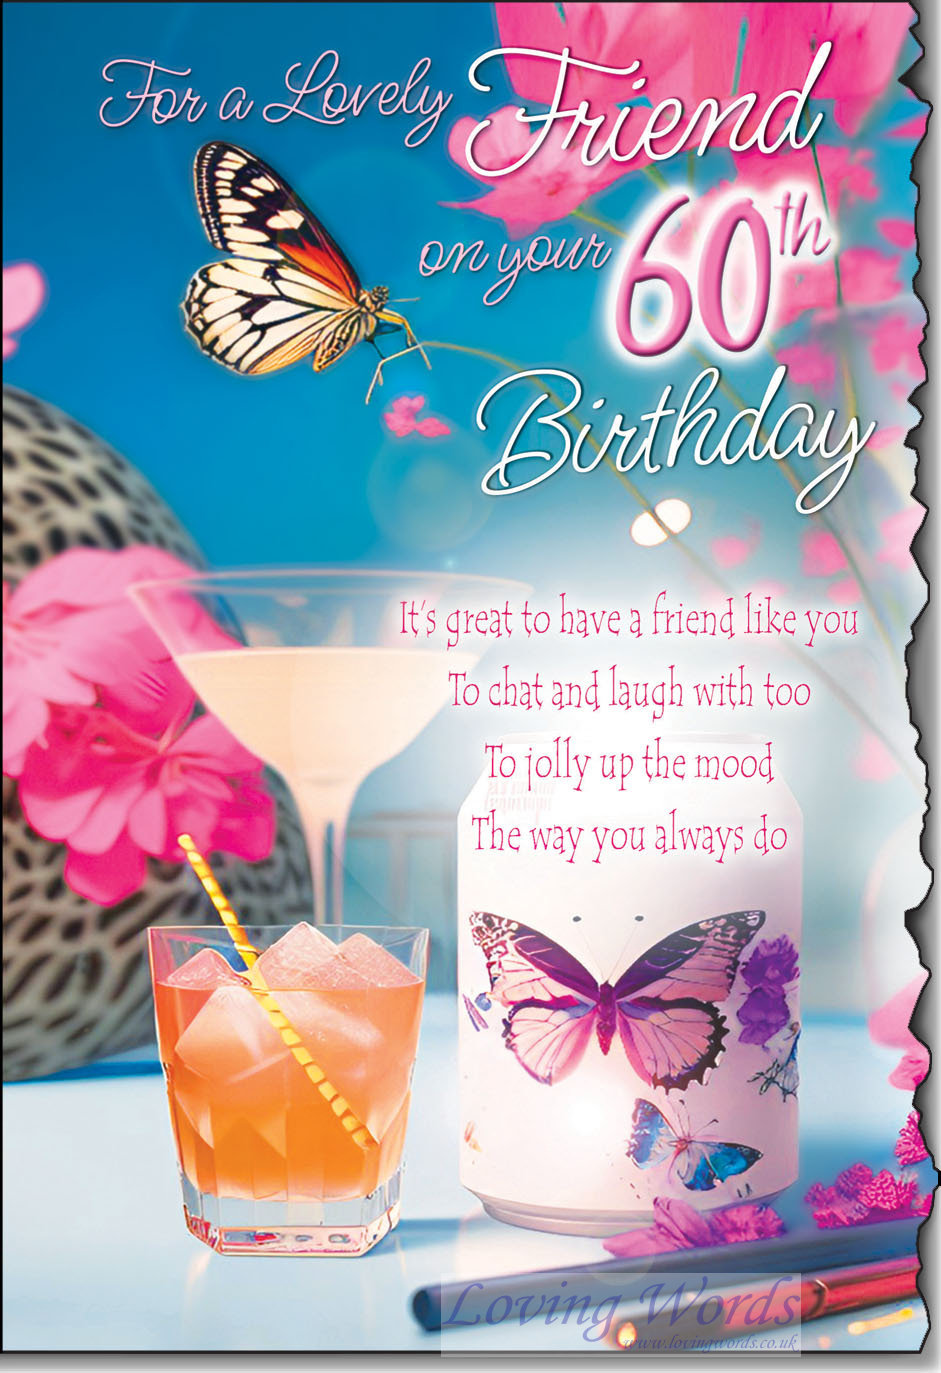 Lovely Friend 60th Birthday Greeting Cards by Loving Words